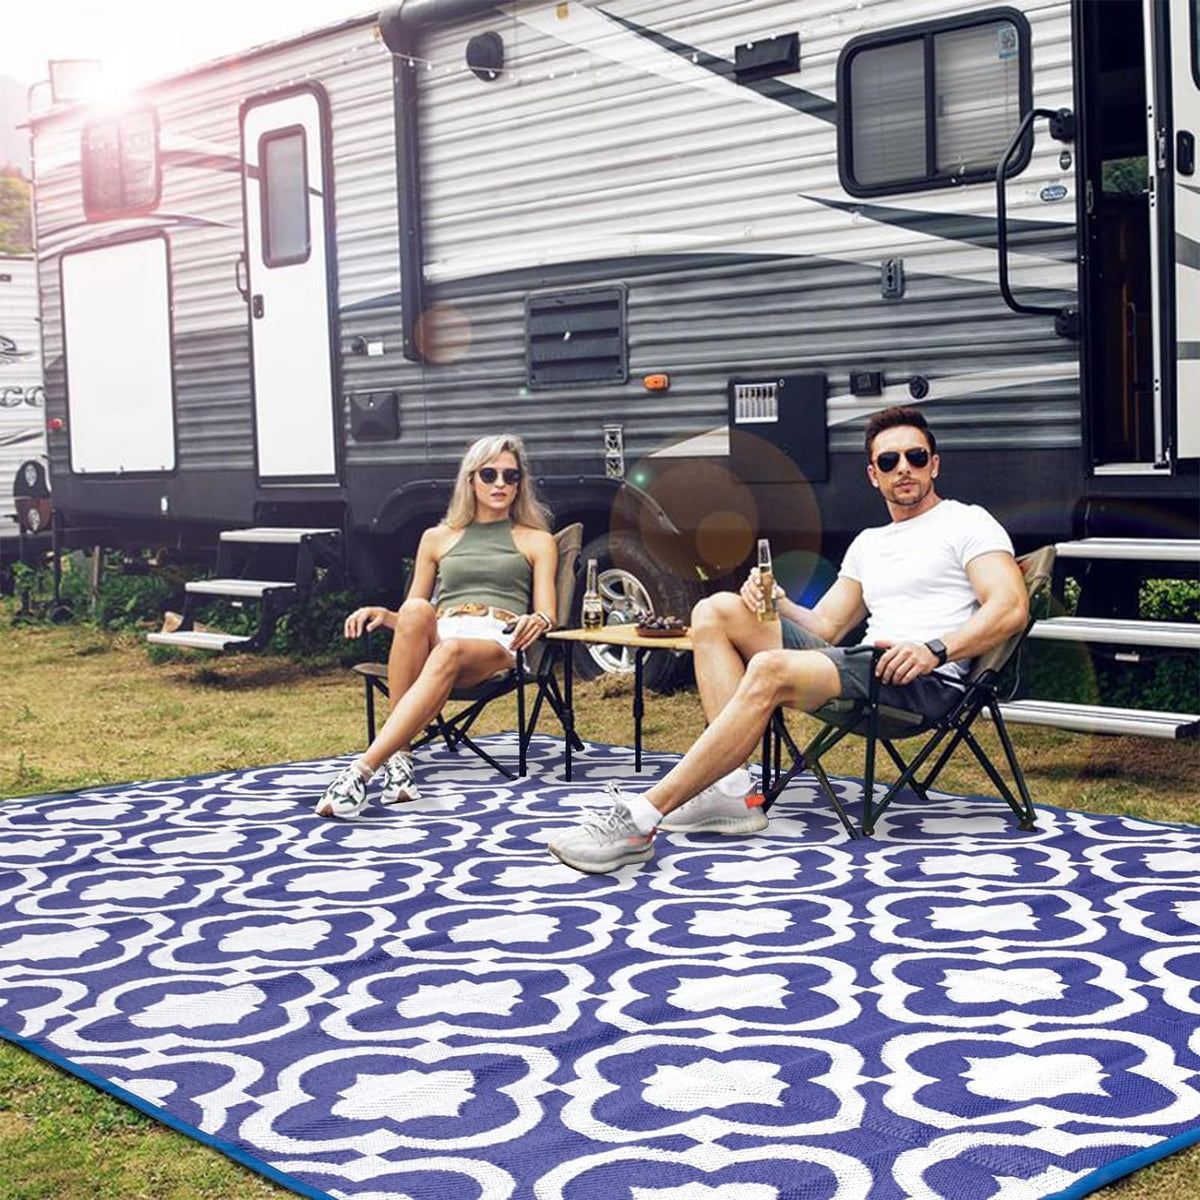 Eclife Outdoor Large Reversible RV Camping Rug, Waterproof & Portable, Blue